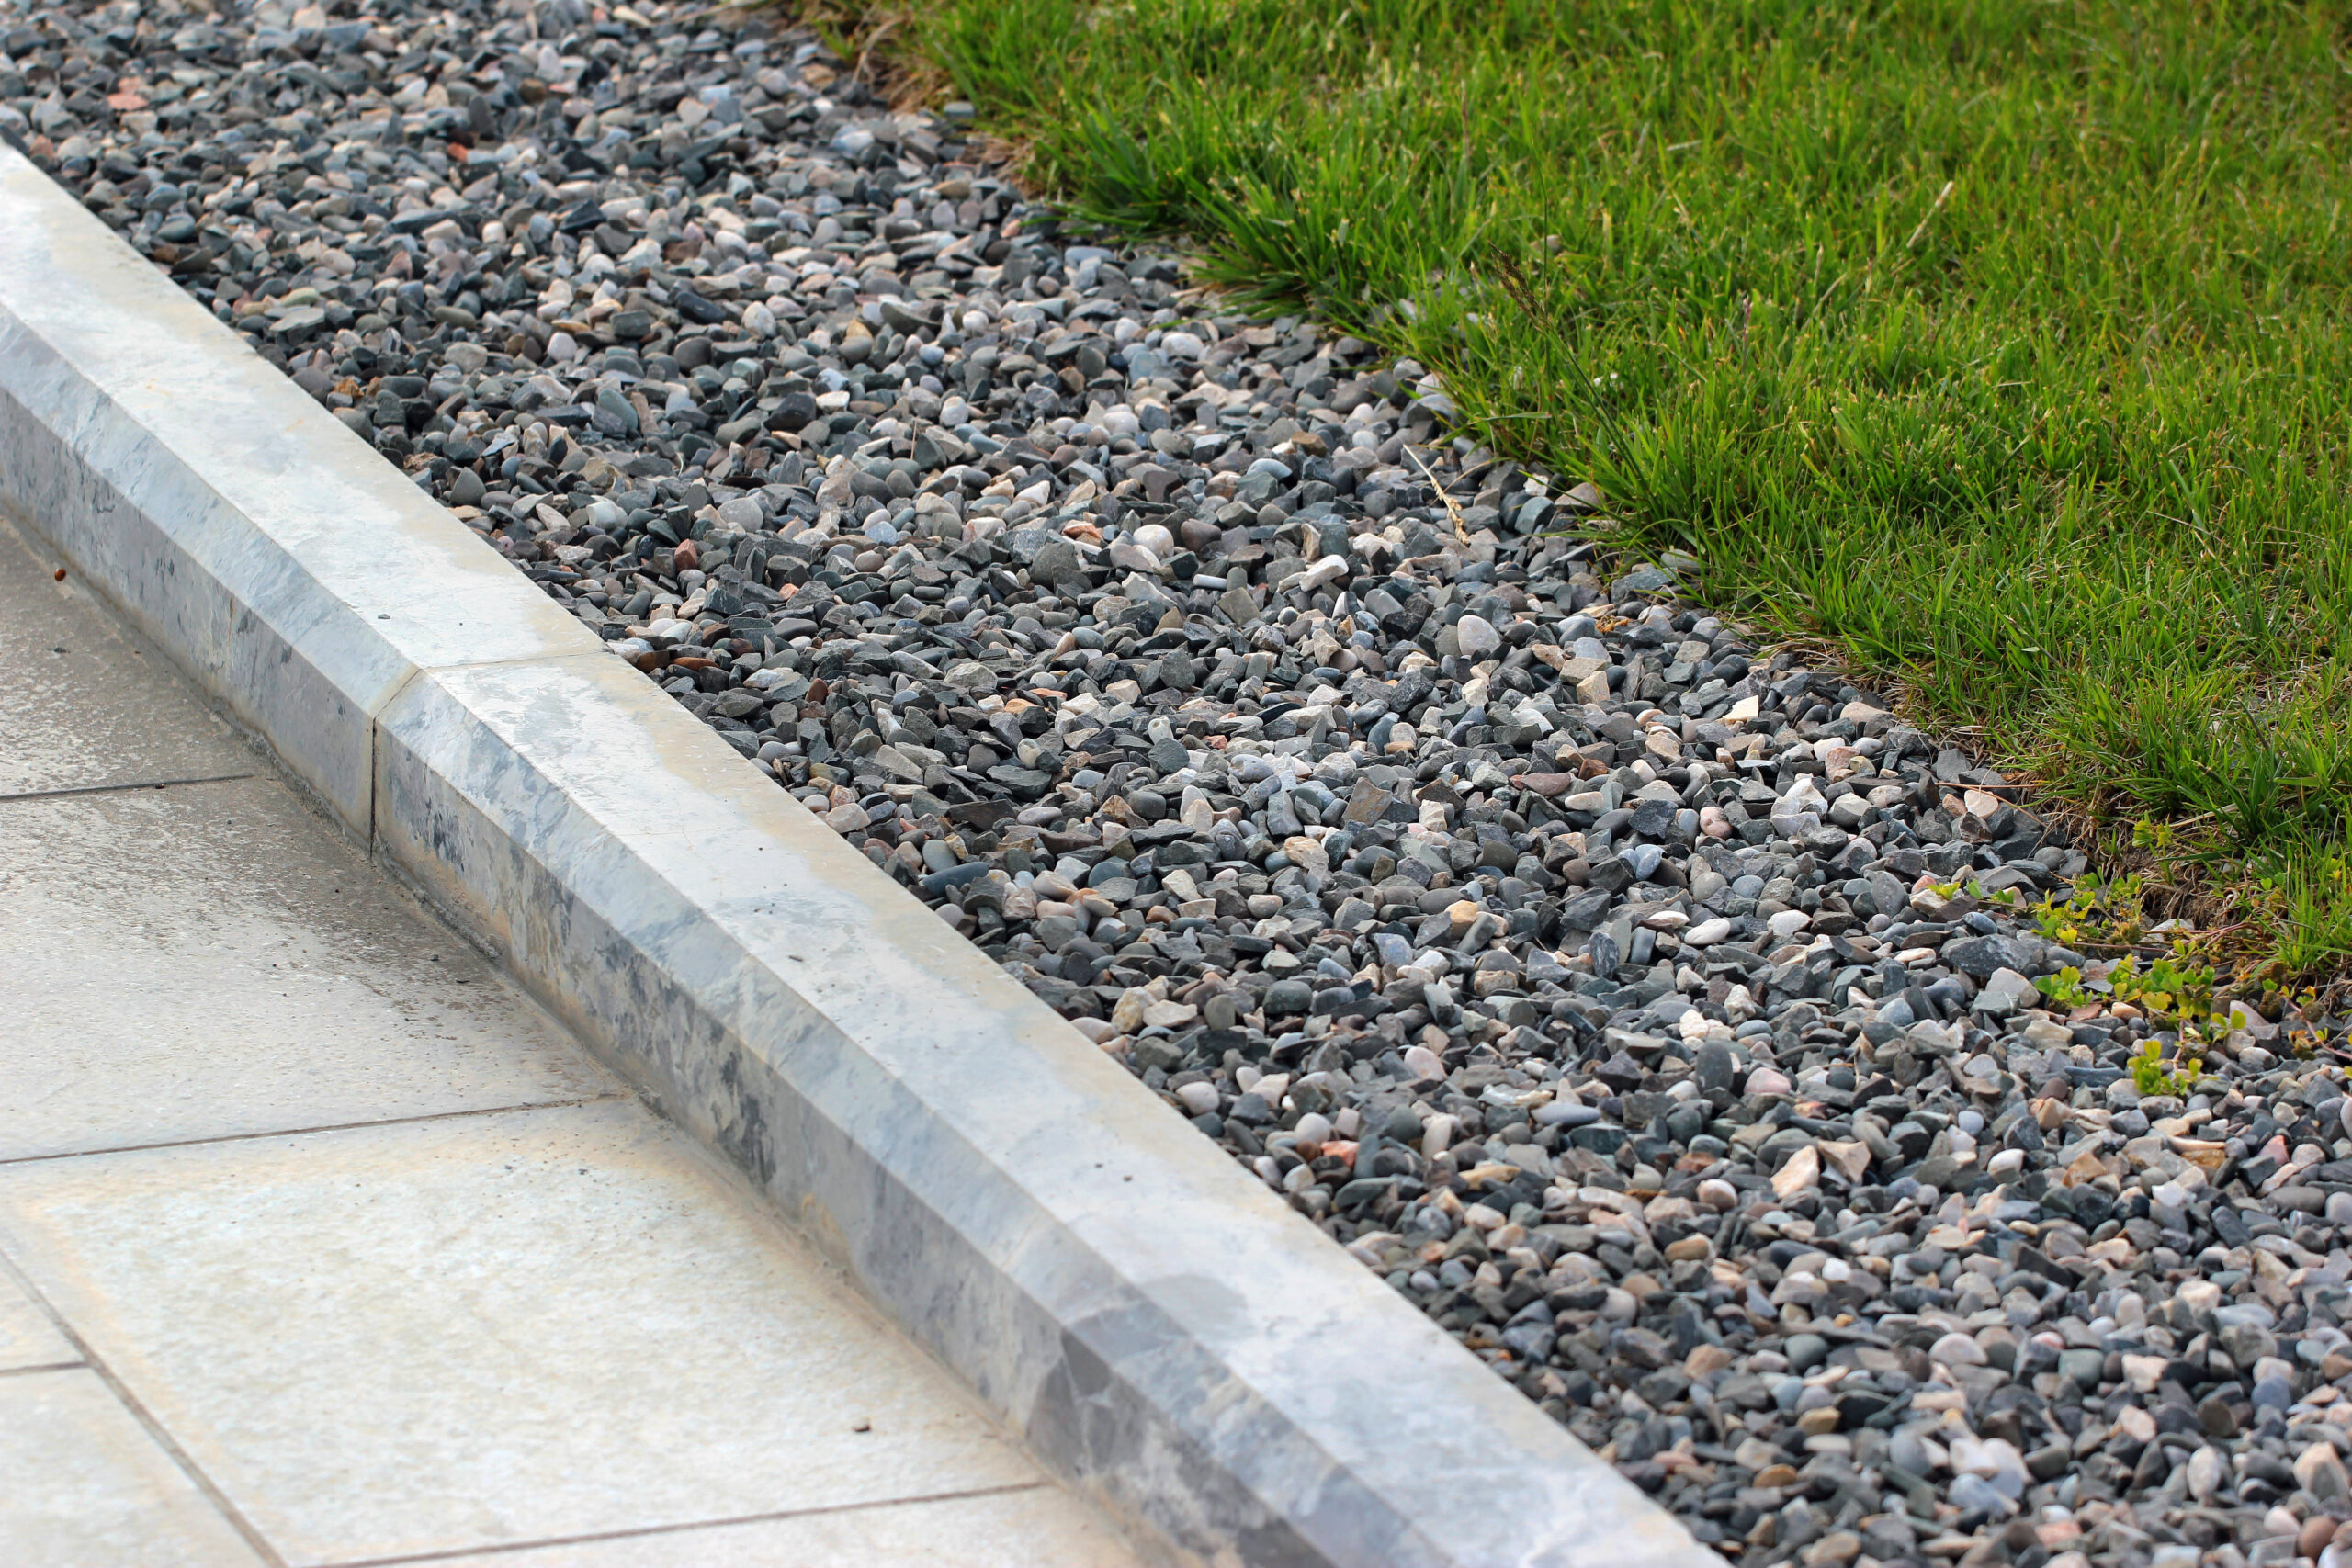 A concrete curb, decorated with gray and white marbling, is constructed in front of gravel and grass.